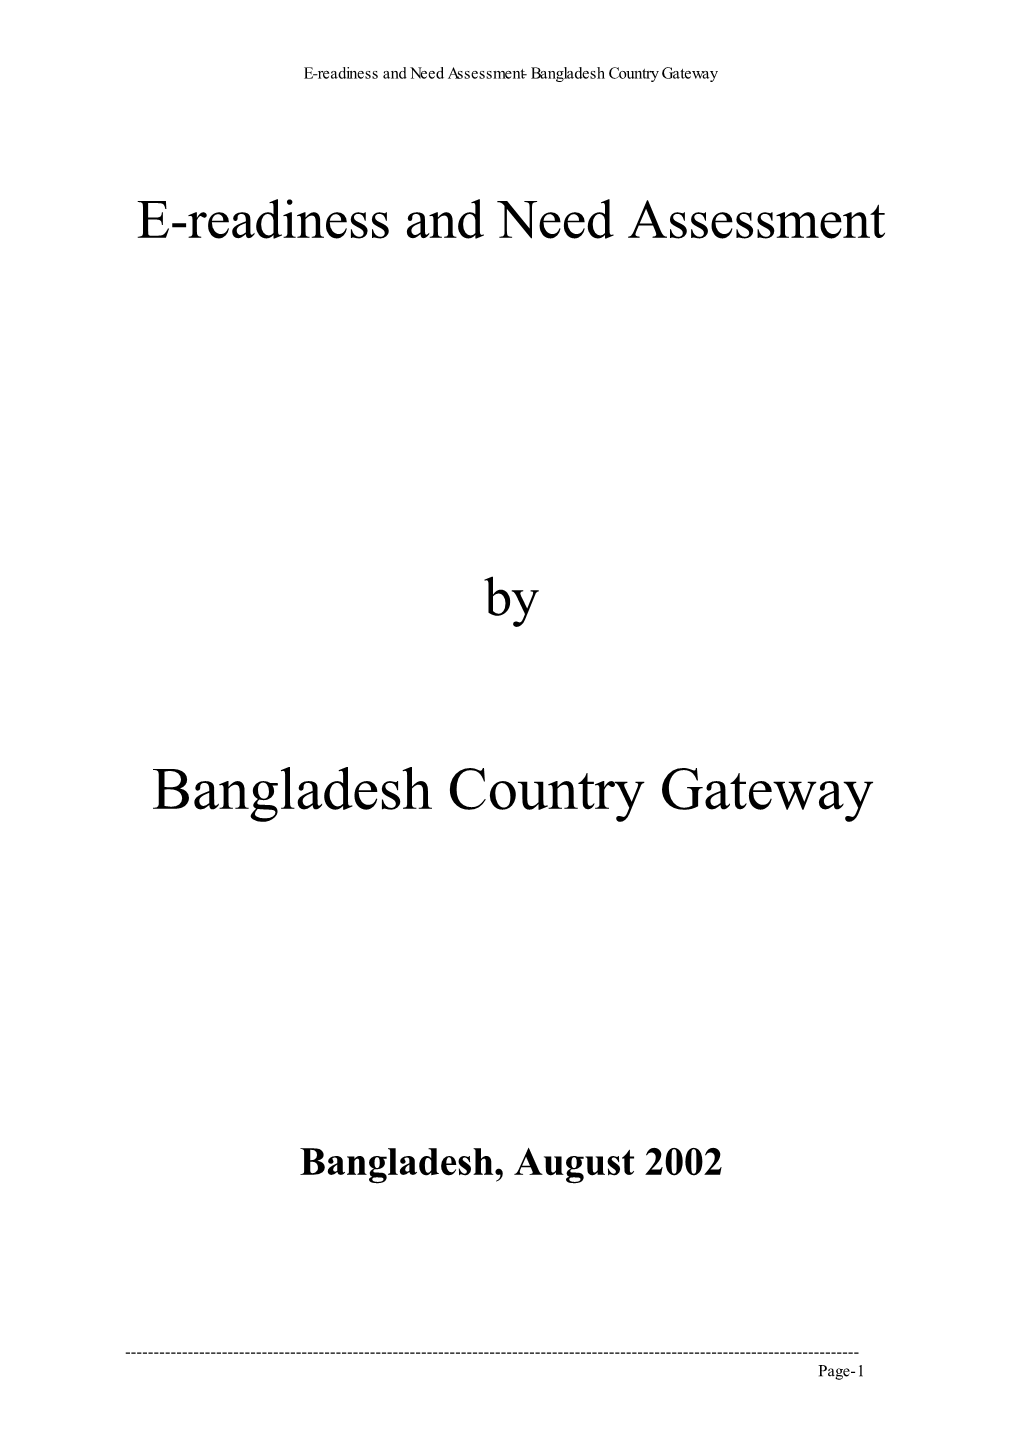 Draft Report on E-Readiness and Need Assessment Submitted to the Infodev